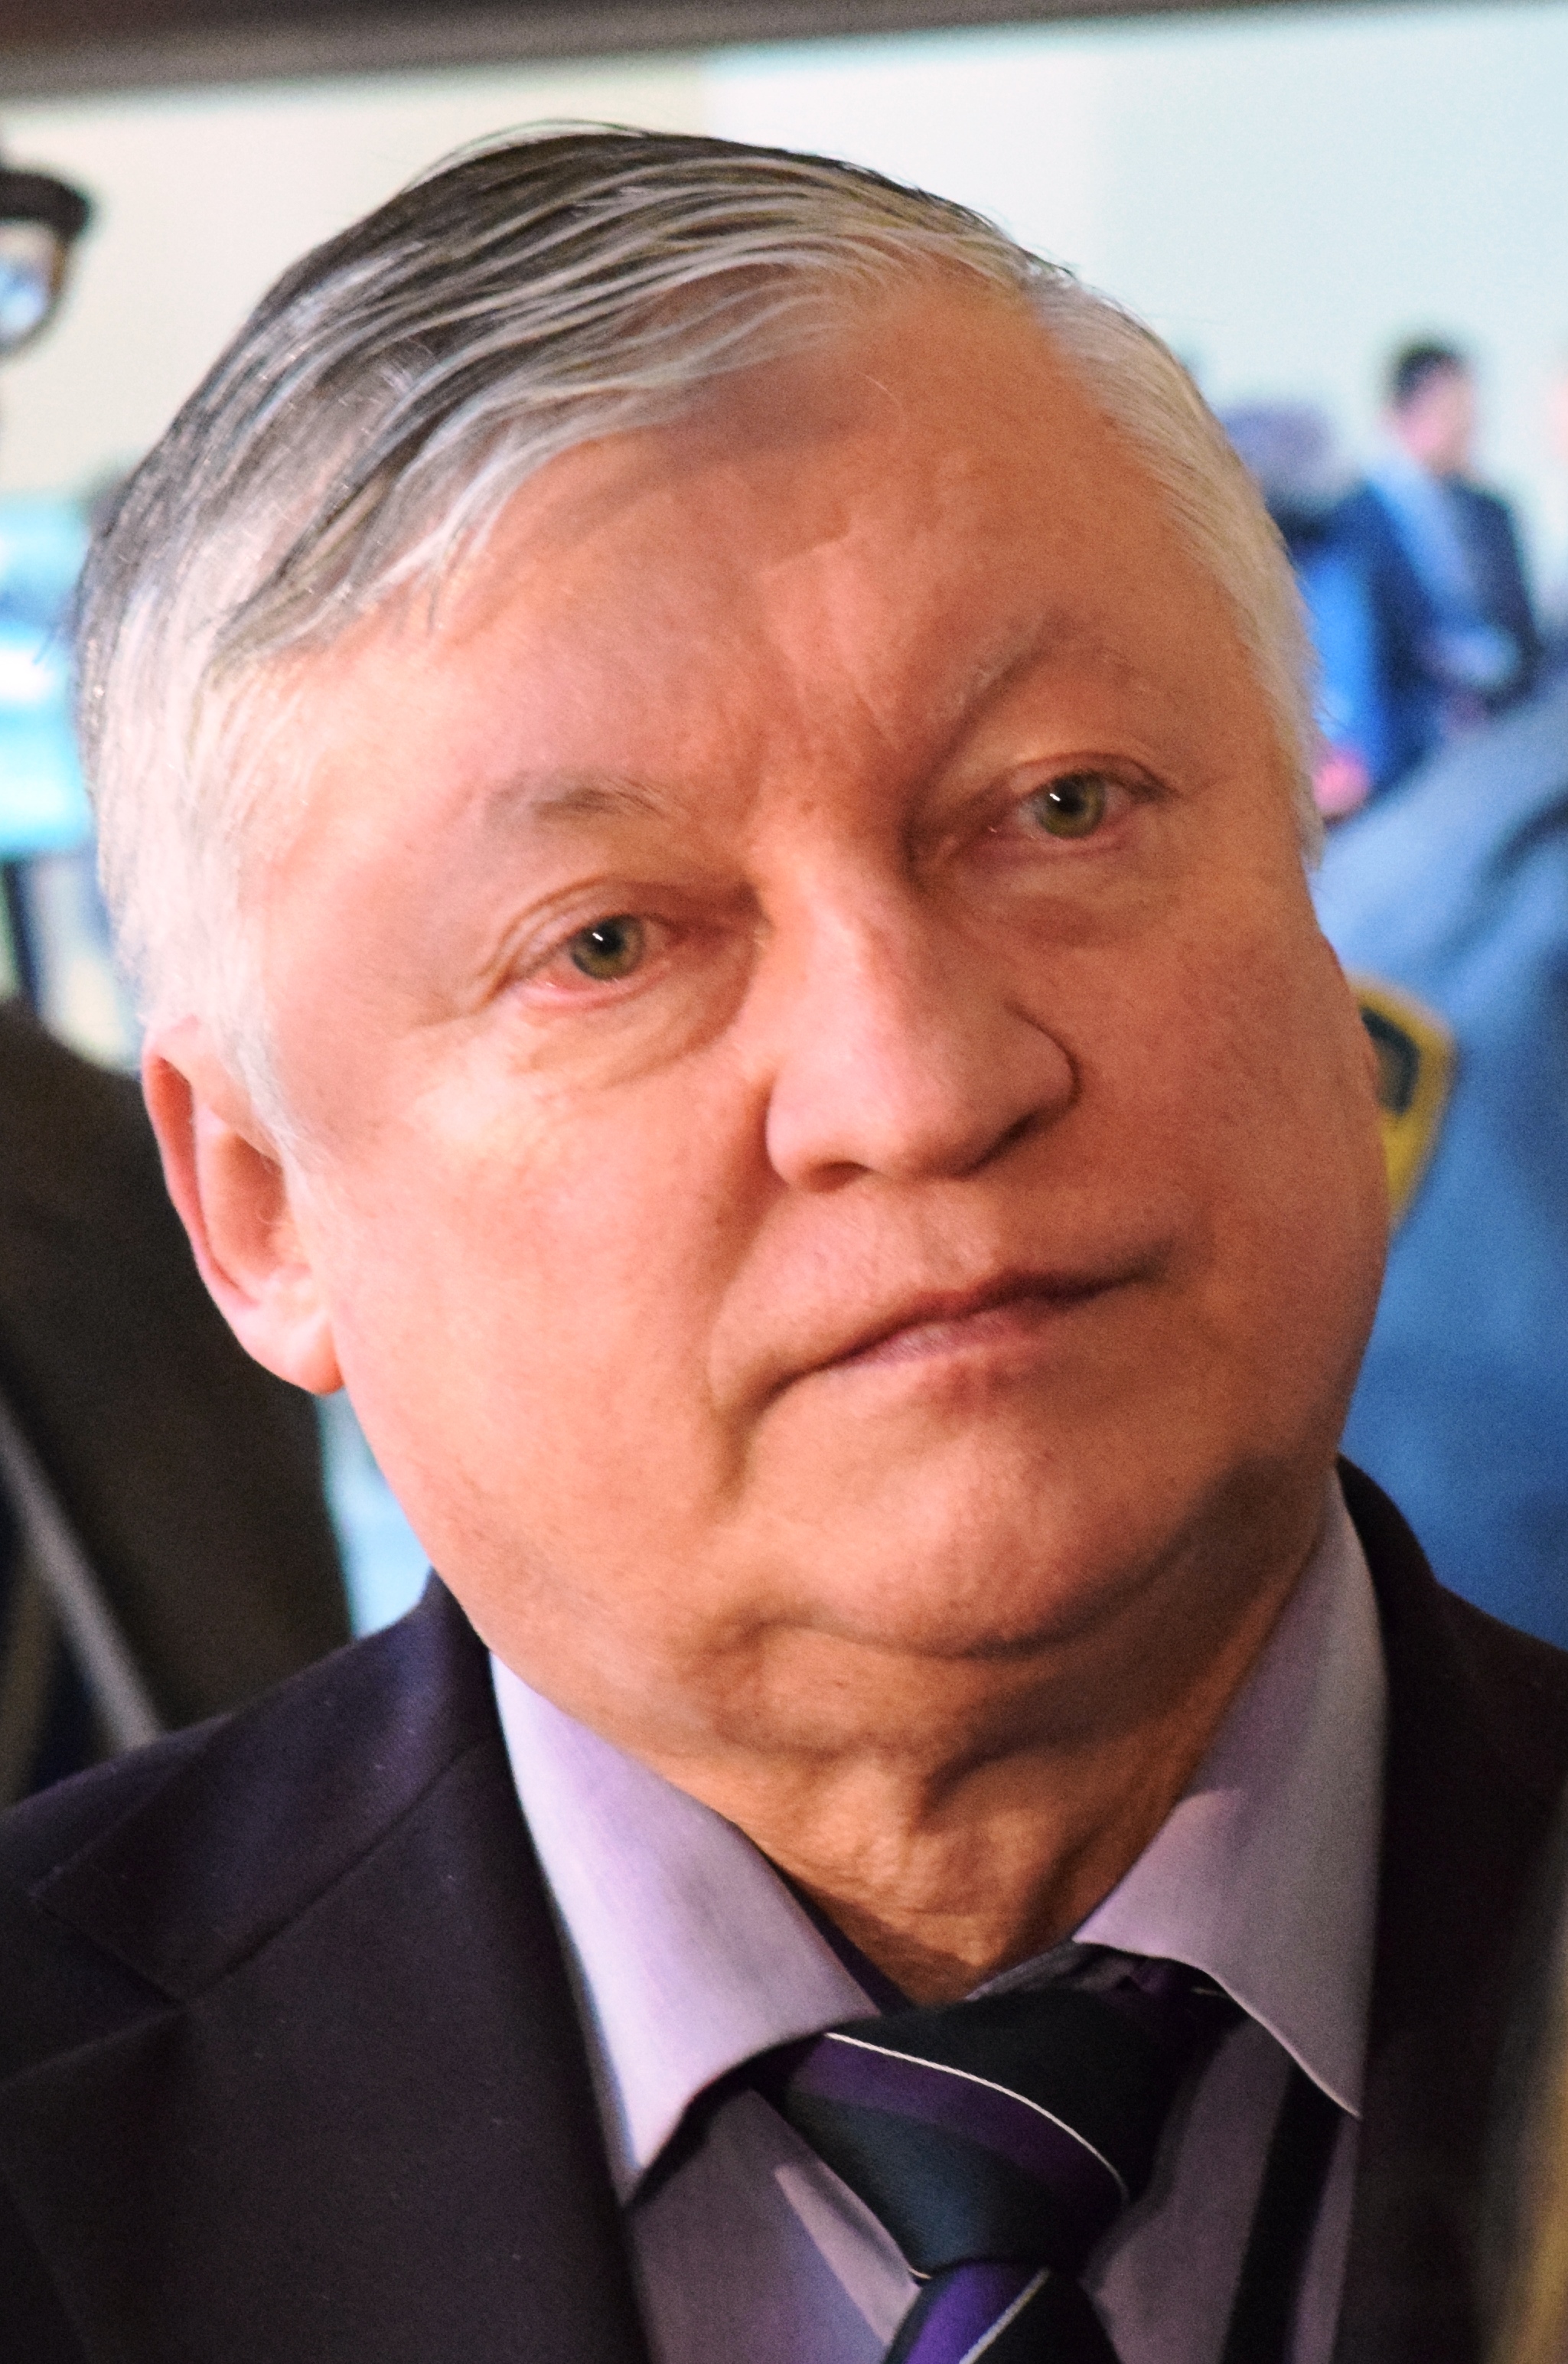 Breaking News: Anatoly Karpov in hospital with fractured skull